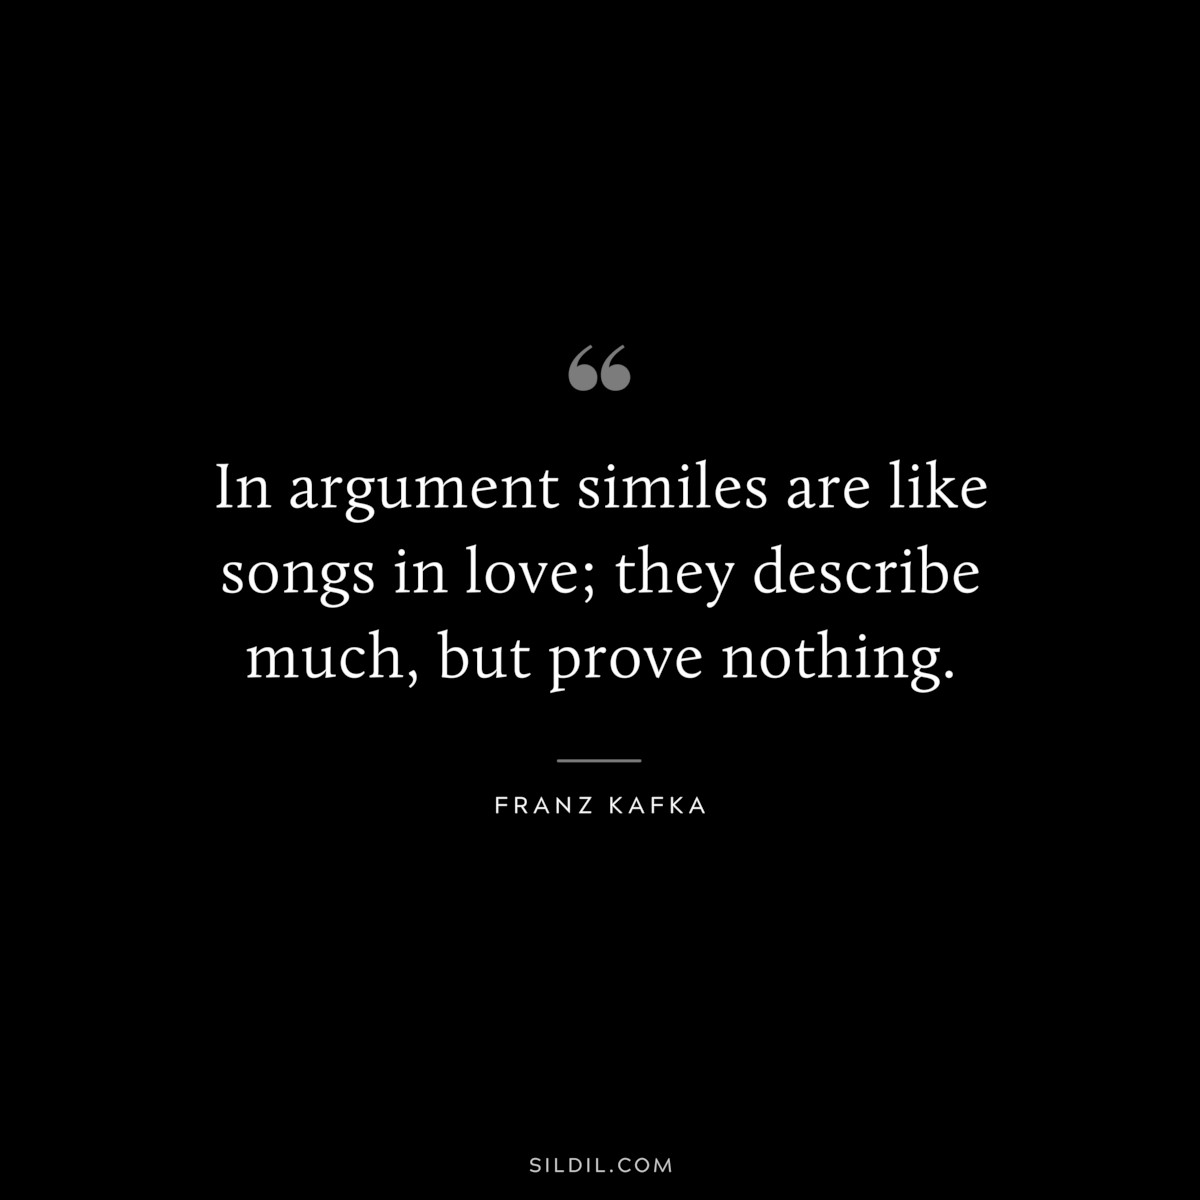 In argument similes are like songs in love; they describe much, but prove nothing. ― Franz Kafka